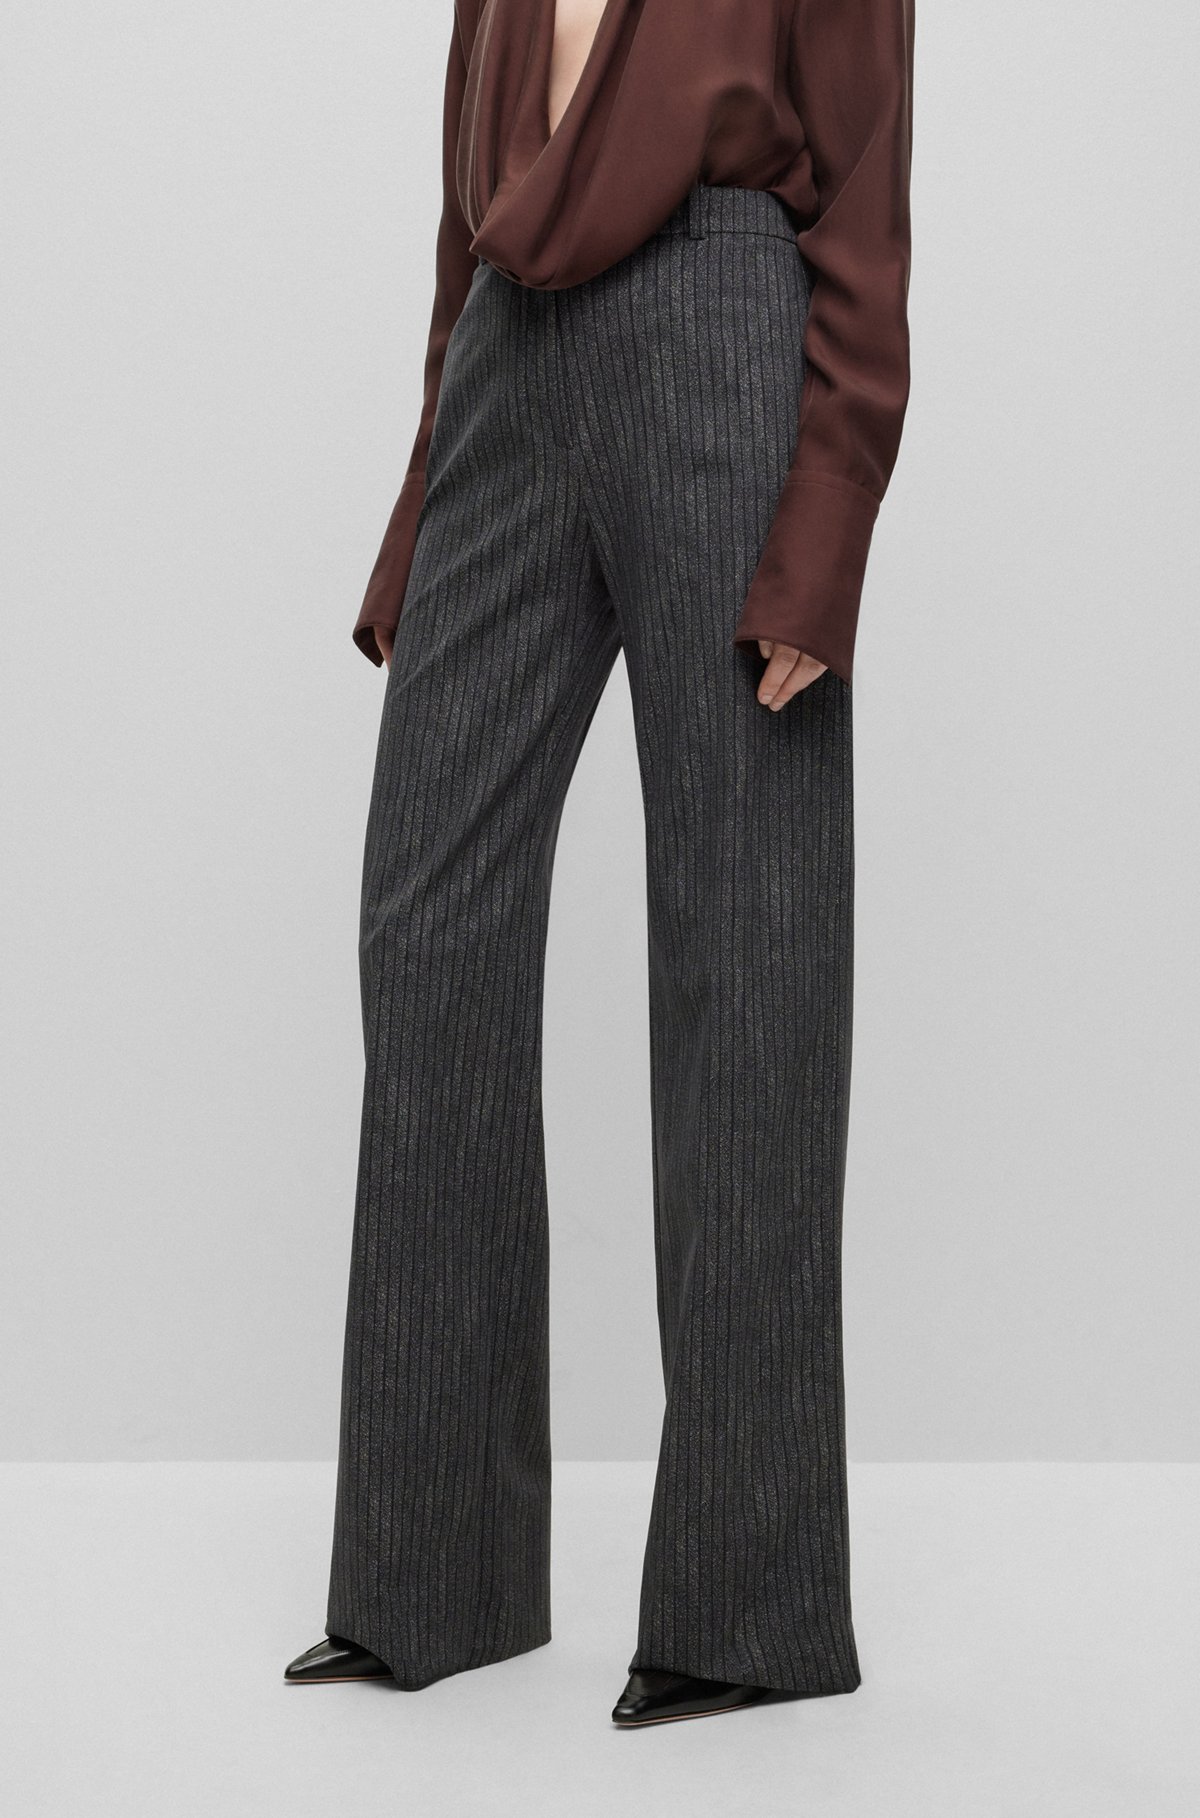 Regular-fit, wide-leg trousers in pinstriped stretch jersey